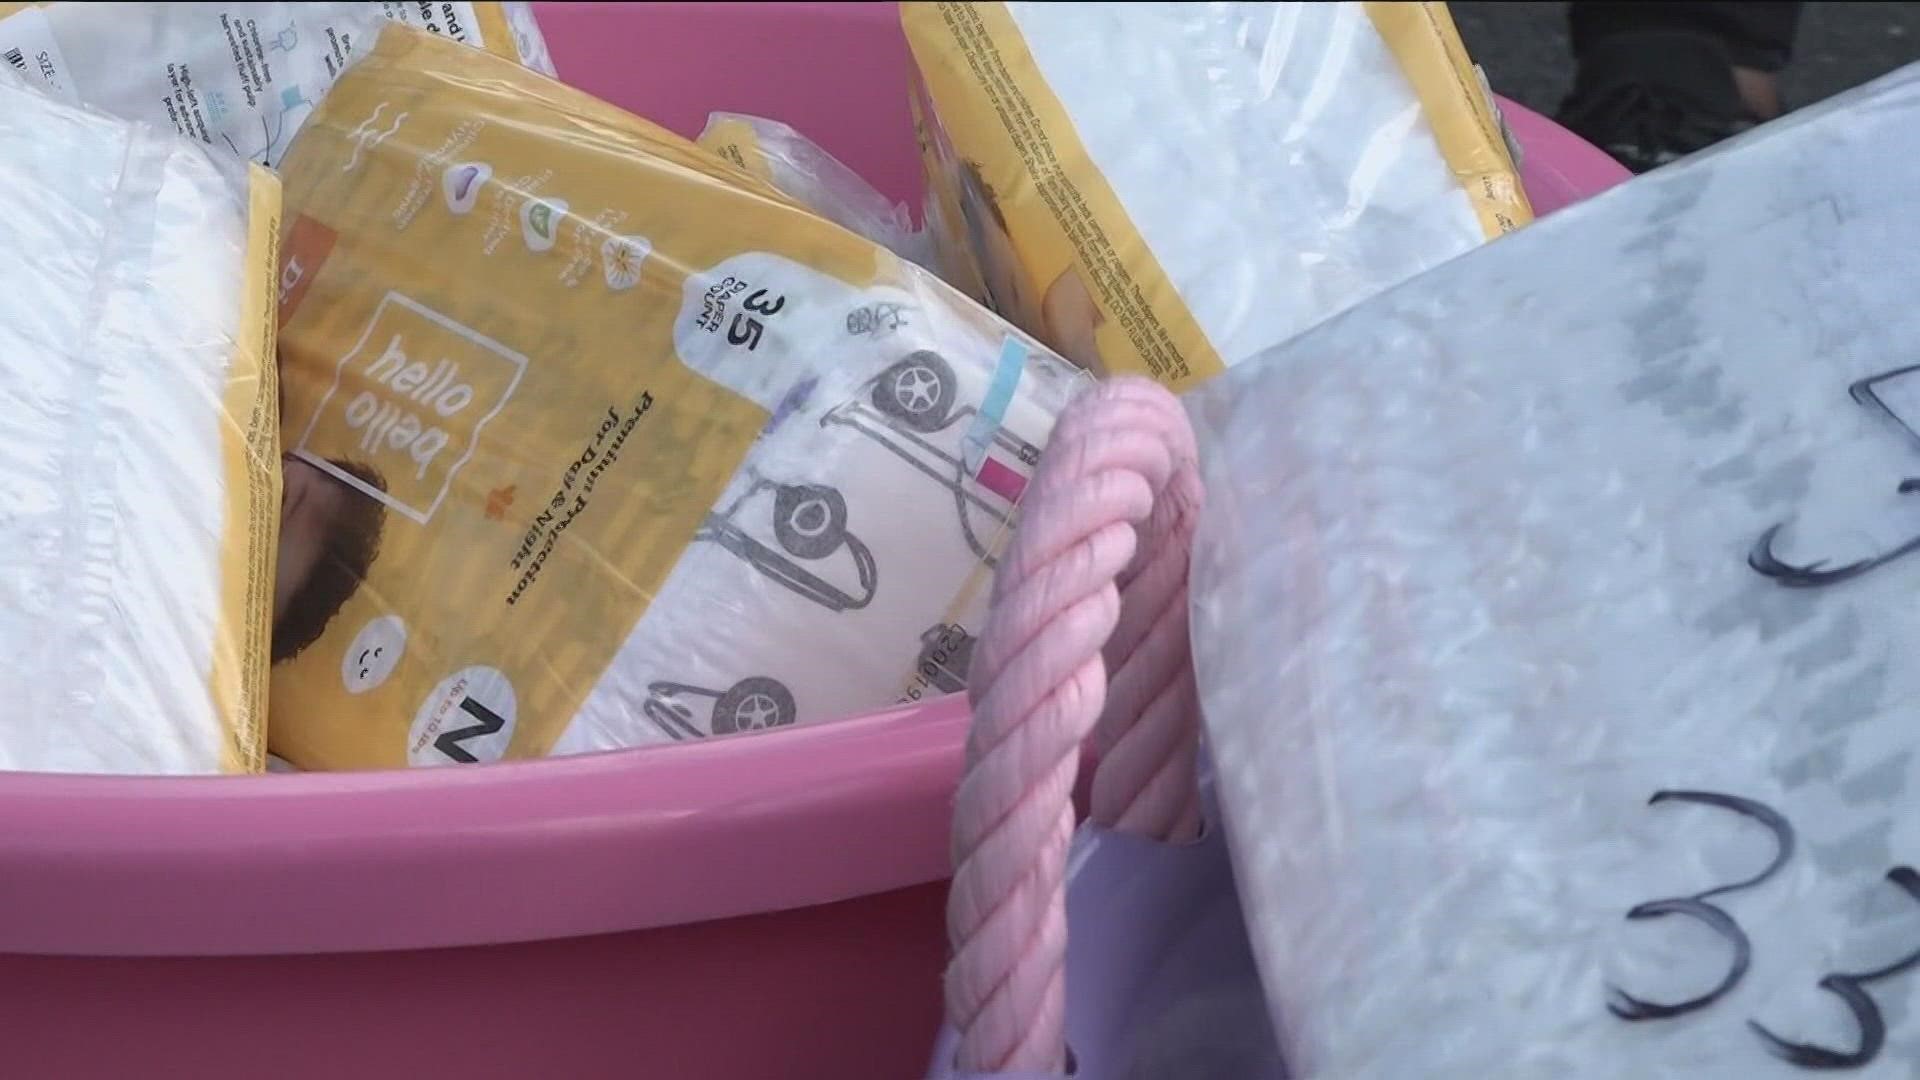 Louisiana and Florida already eliminated or paused sales tax on diapers; South Carolina will consider a similar bill.